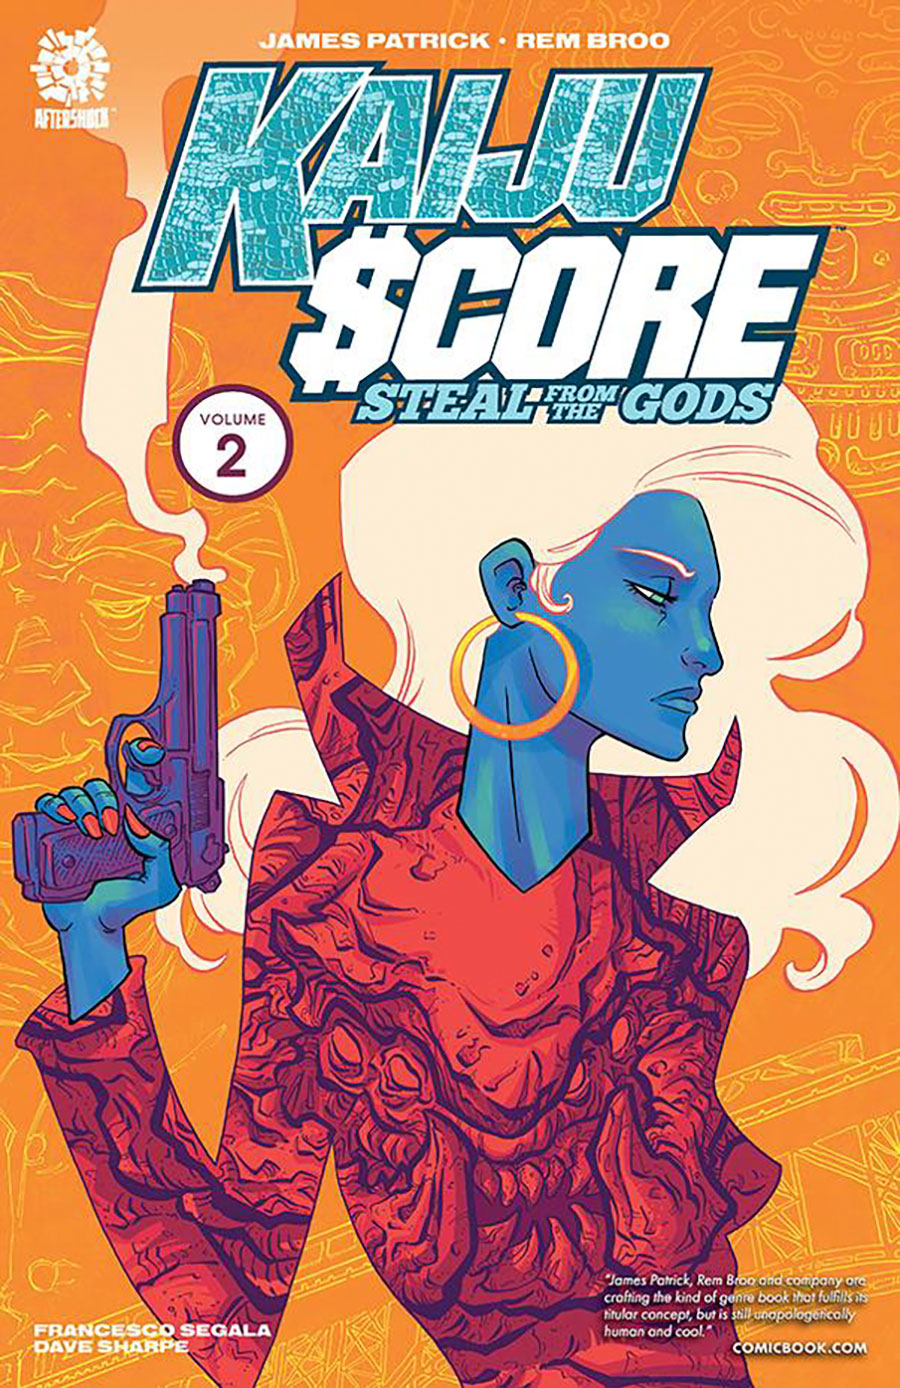 Kaiju Score Vol 2 Steal From The Gods TP